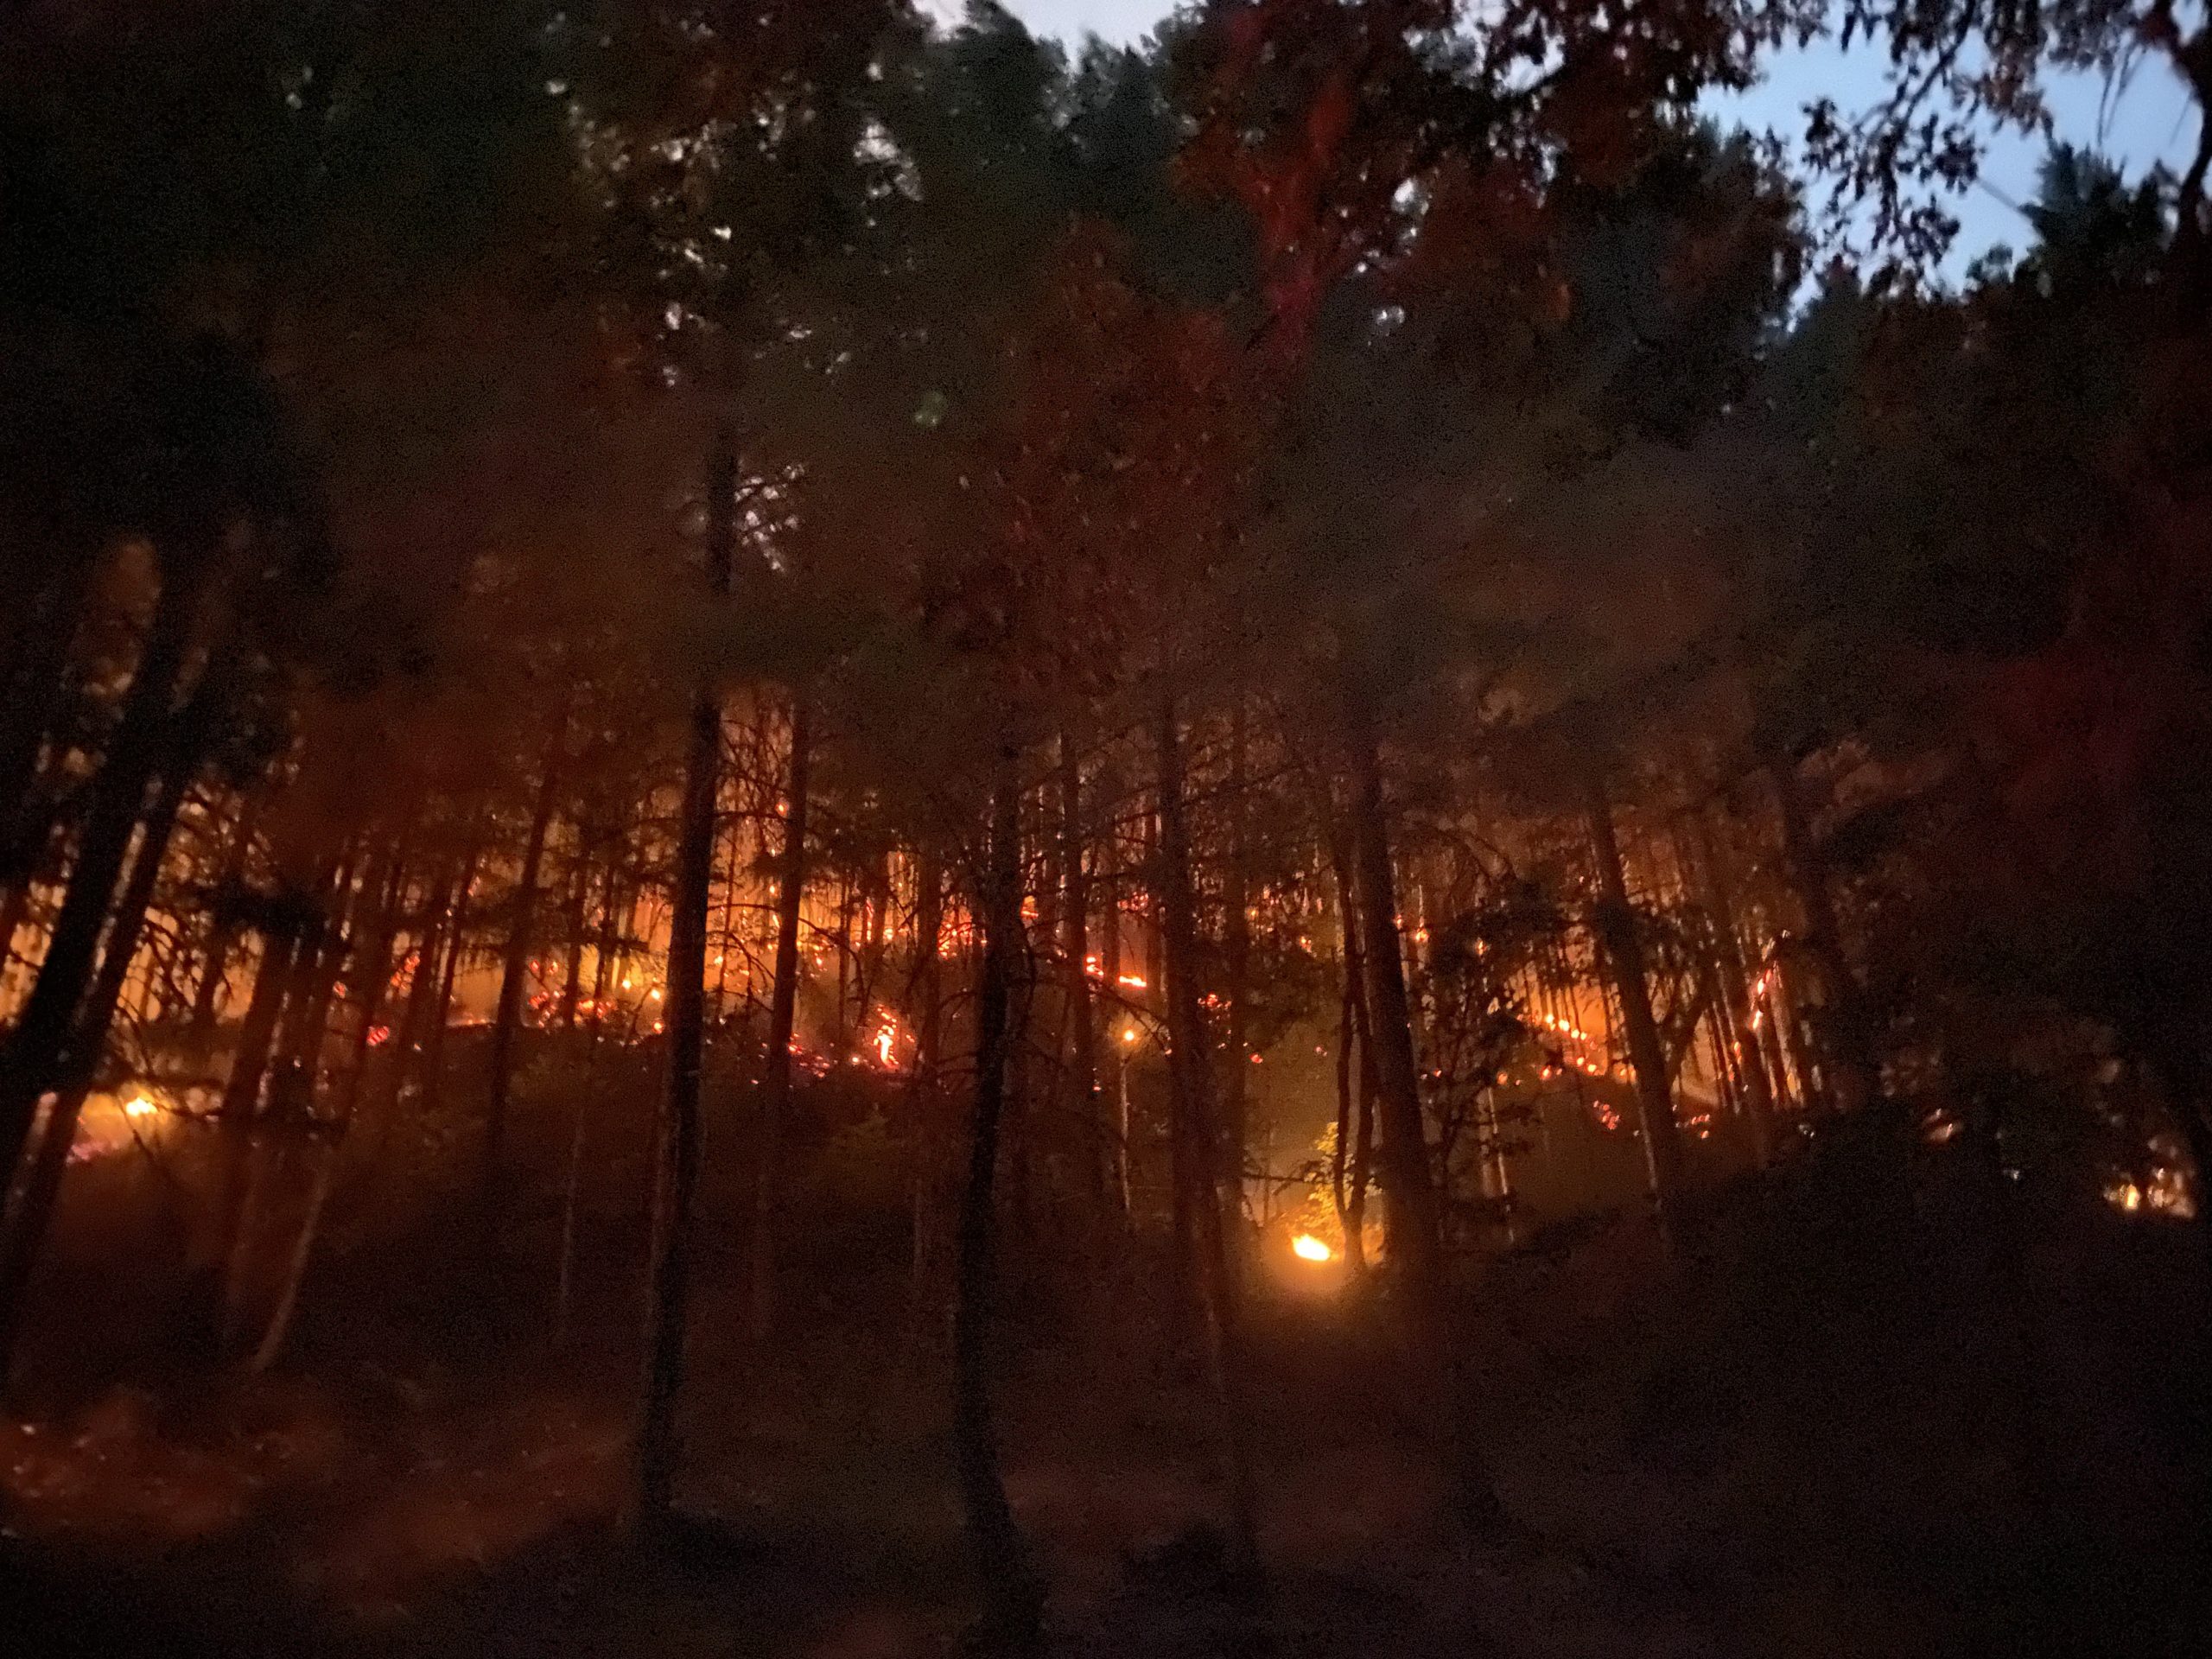 Fielder Creek Fire, Northwest of Rogue River,100% Lined and Plumbed Overnight